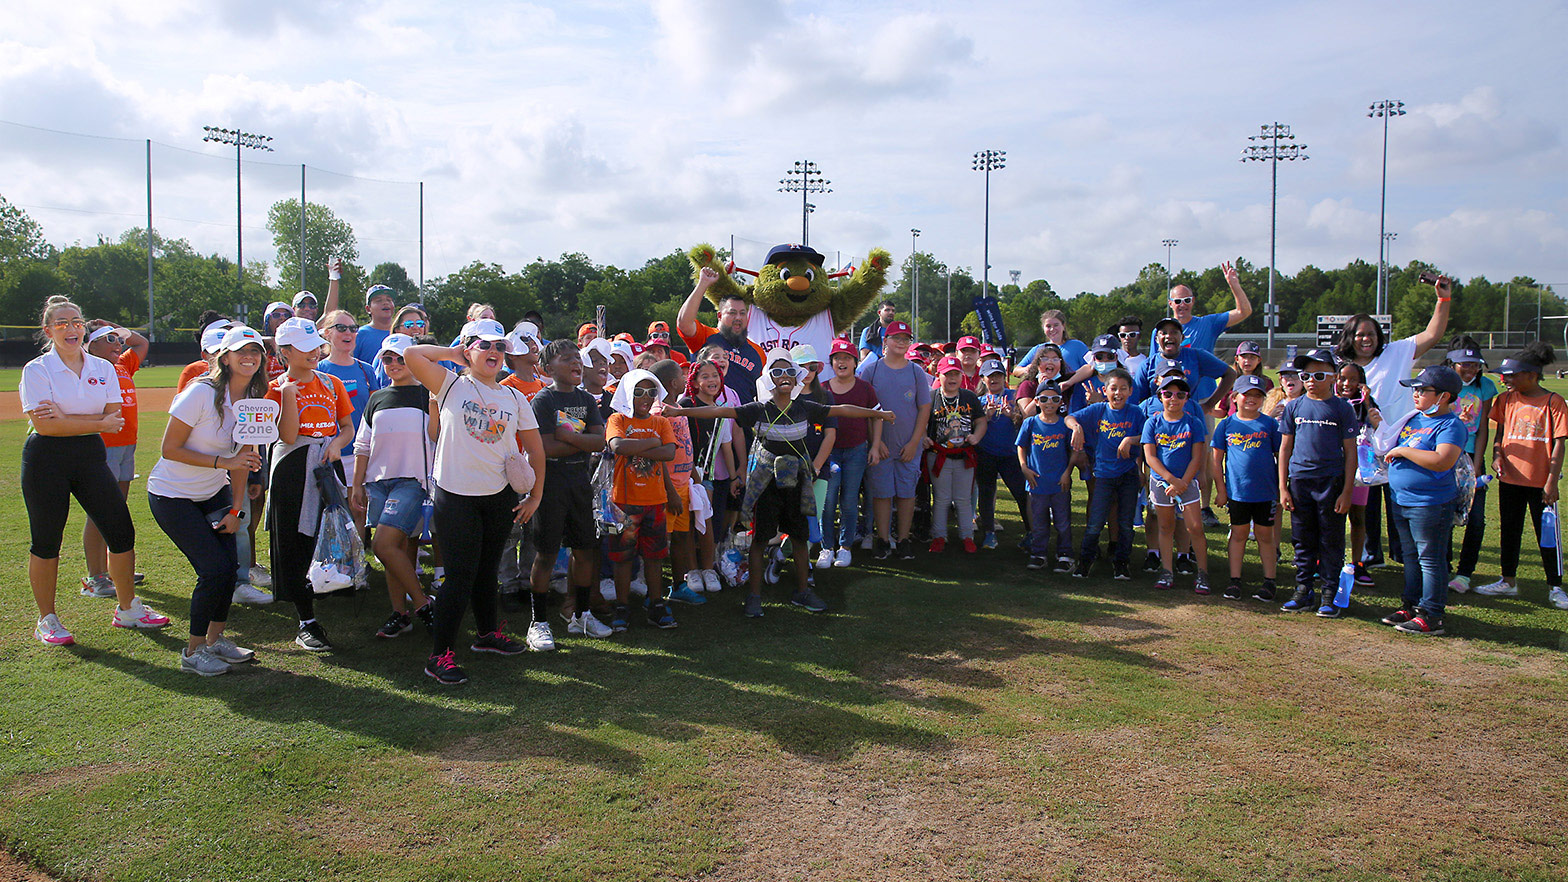 Orbit, the Houston Astros mascot, with crowd of children and adults.